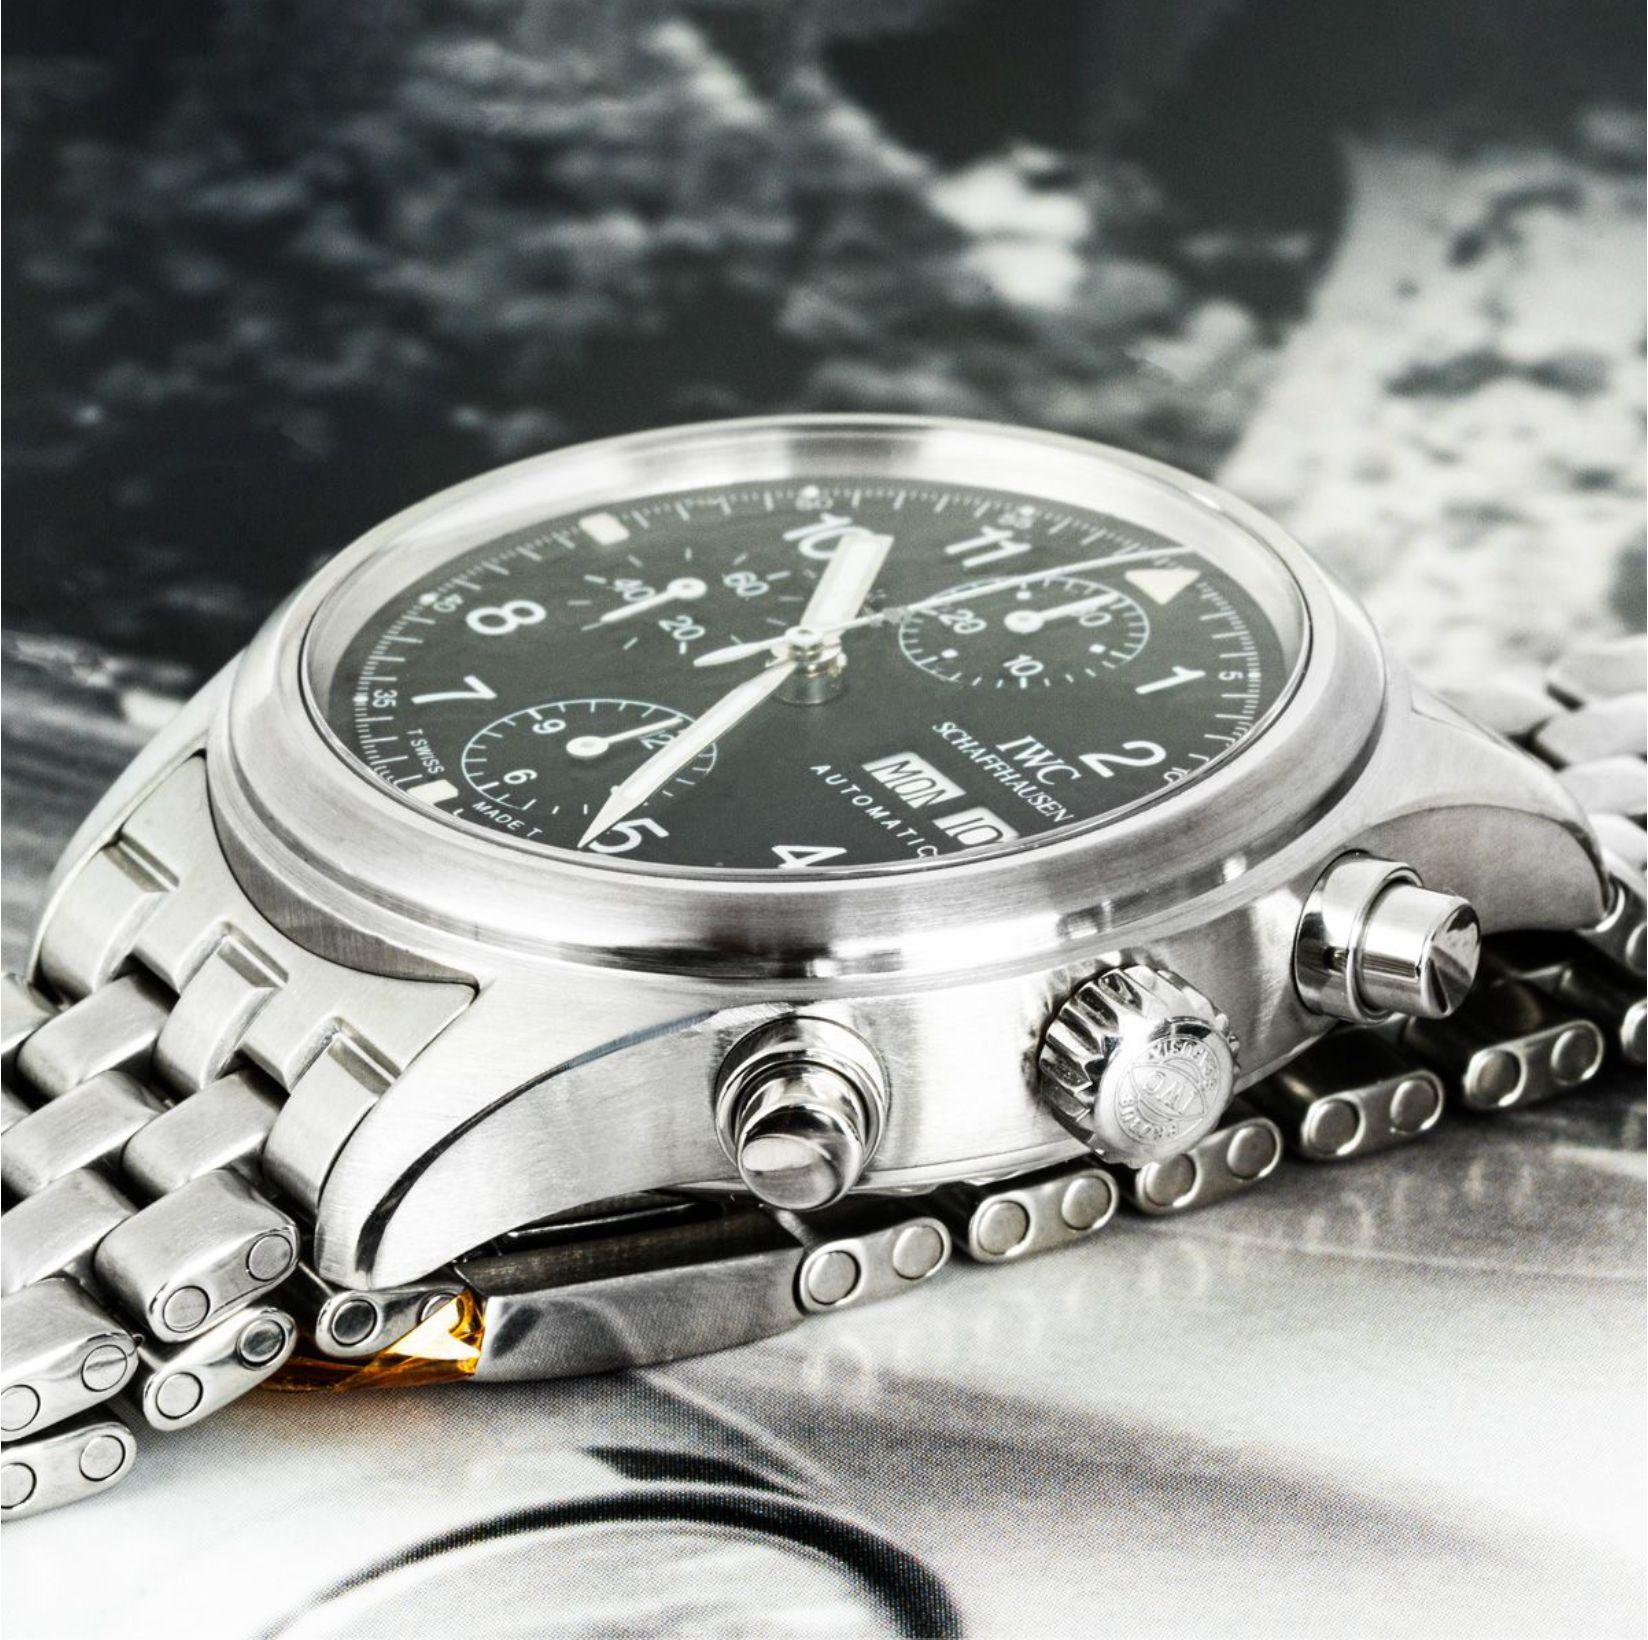 A stainless steel Flieger Chronograph wristwatch by IWC. Featuring a black dial with arabic numbers, a date aperture, a day indication, 3 chronograph counters and a steel bezel. Fitted with a sapphire glass and powered by a self-winding automatic